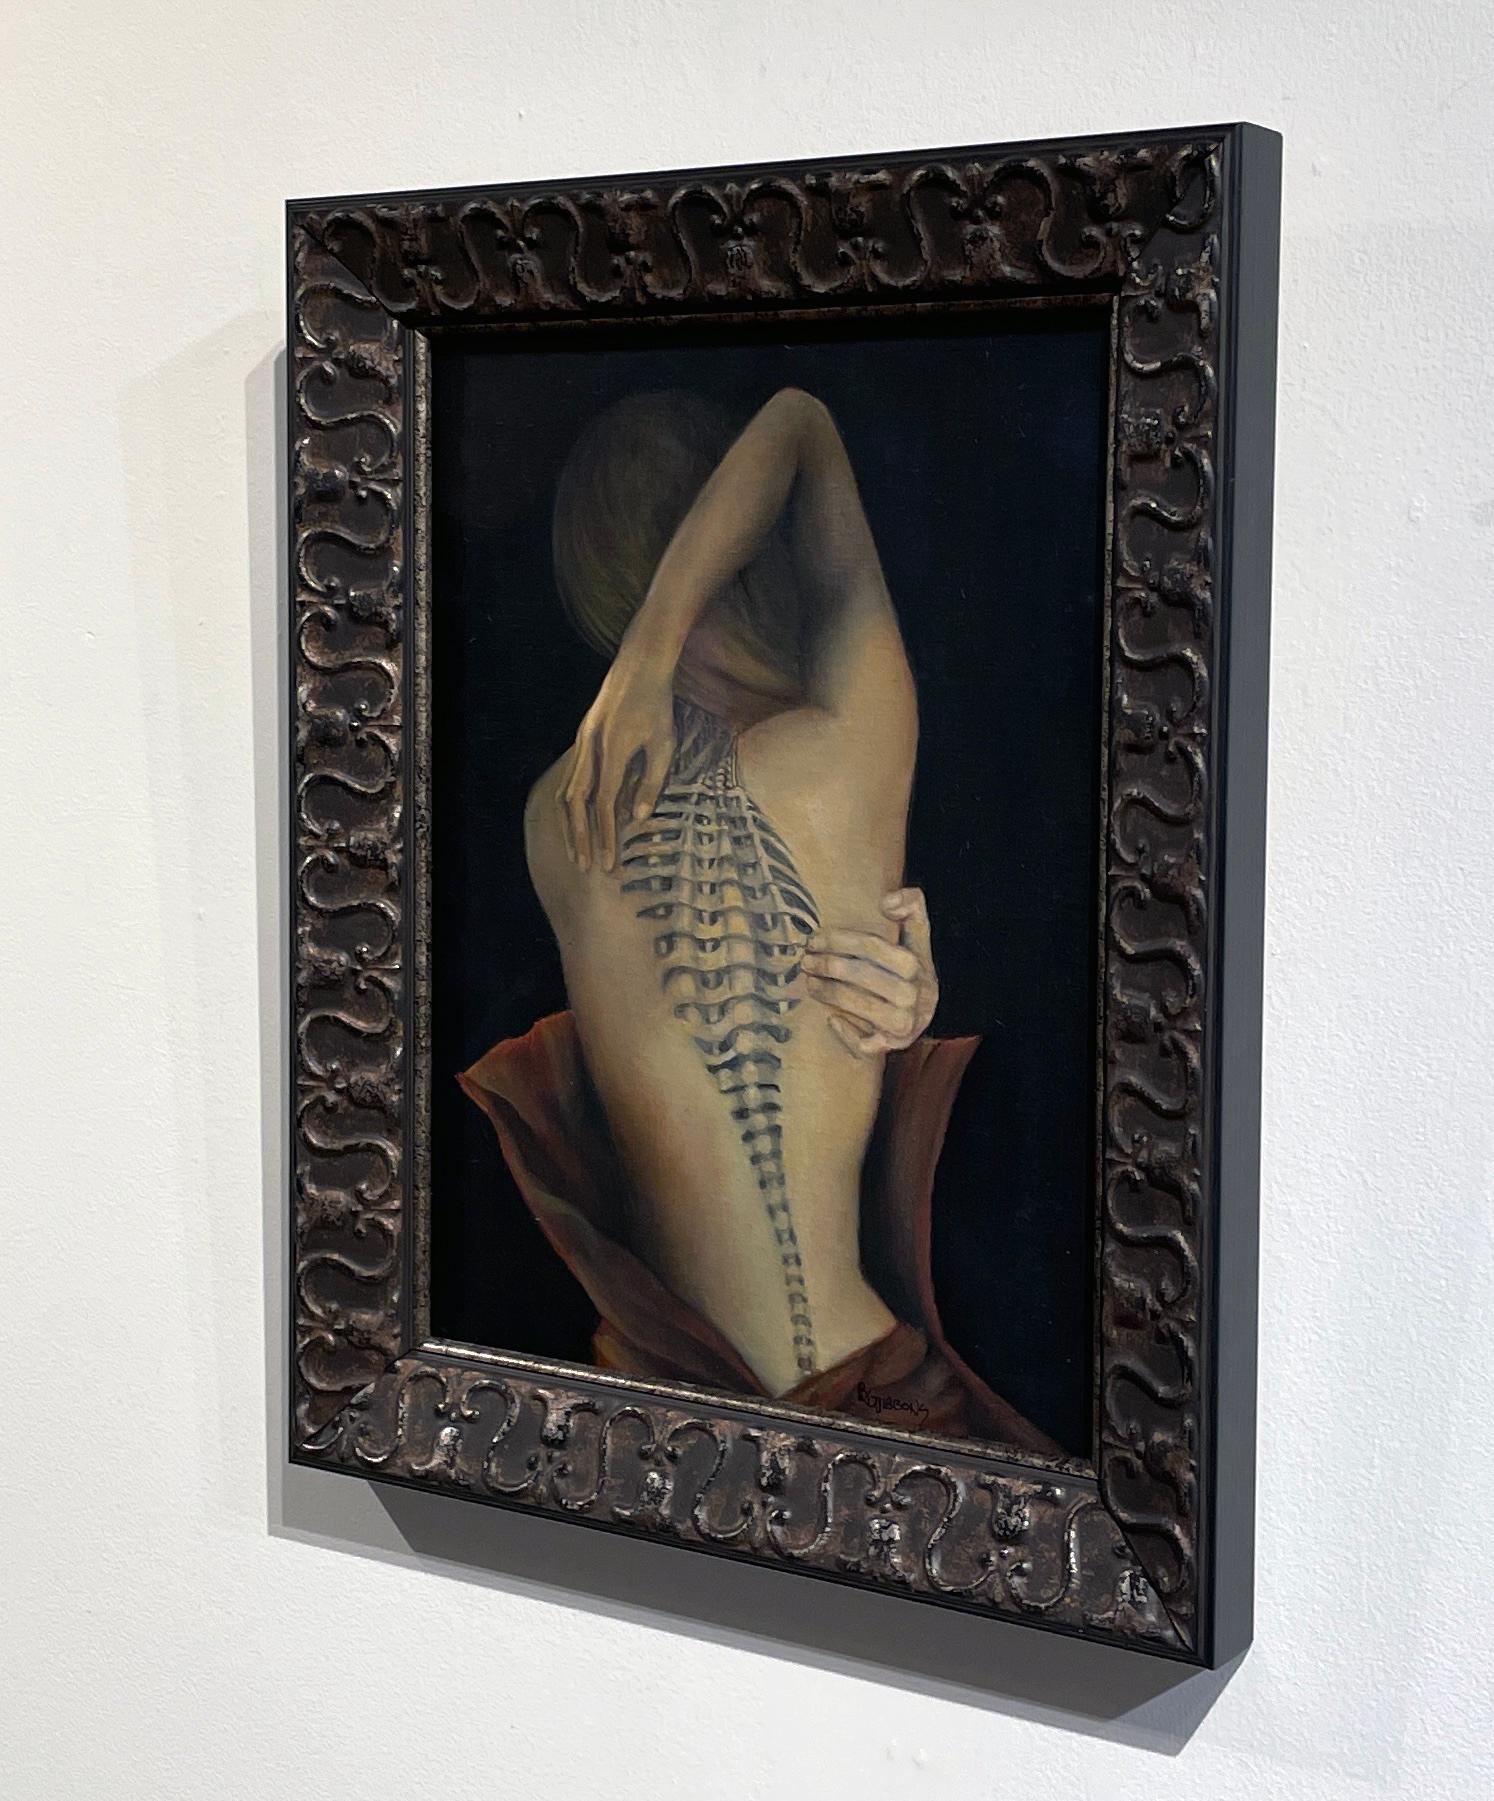 Trompe L'Oeil - Female Nude with Intricate Tattoo of the Spinal Column, Framed - Black Nude Painting by Richard Gibbons